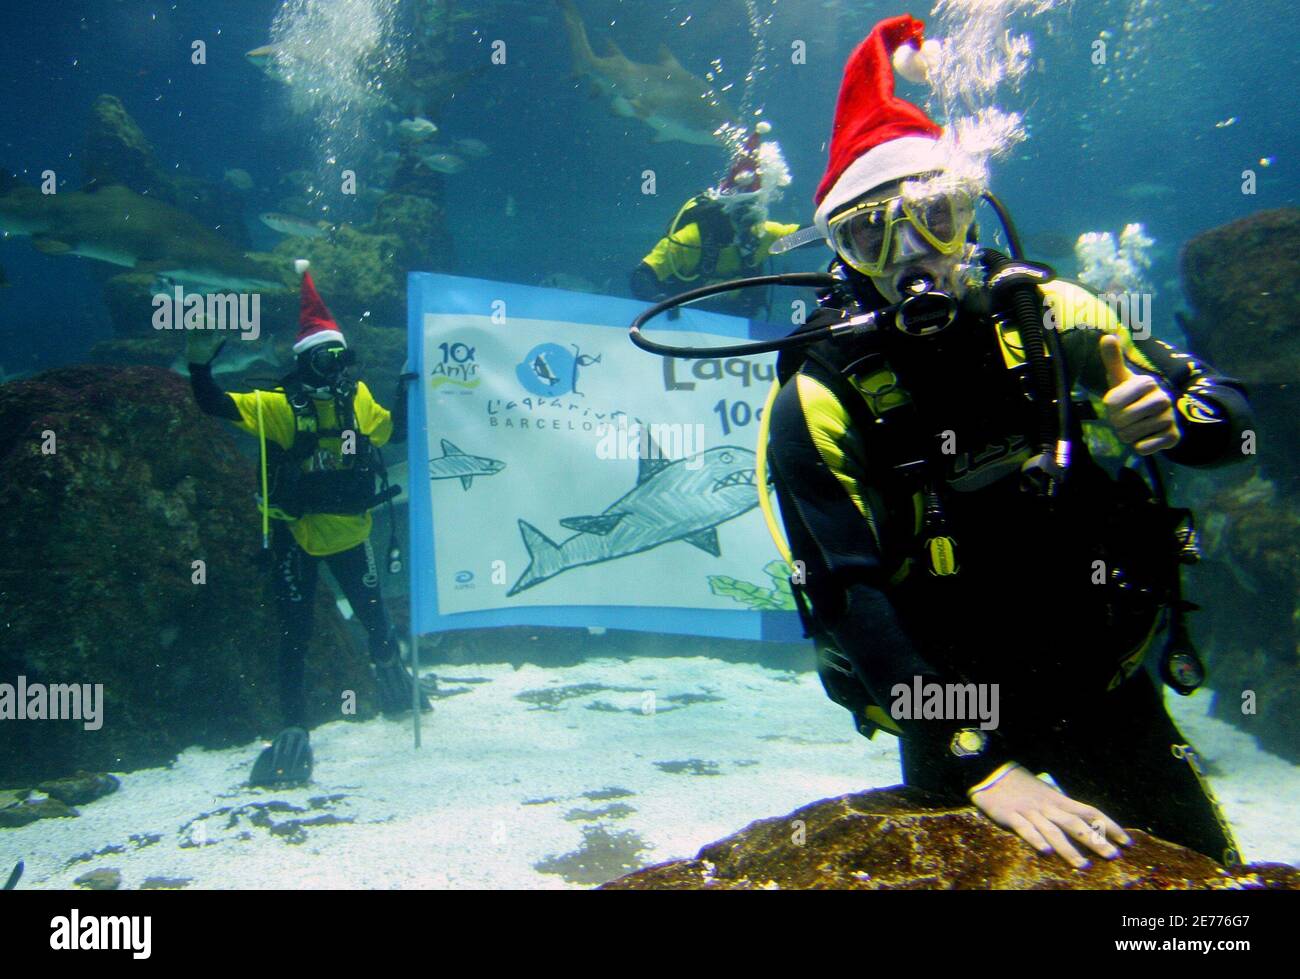 FC Barcelona's player Lionel Messi (R) of Argentina gestures from inside a tank at the Barcelona Aquarium while wearing a Santa Claus' hat in Barcelona December 19, 2005. The aquarium celebrates its anniversary each year with a sport or celebrity personality. The banner in the background reads 'Ten years with you' in celebration of the aquarium's ten year anniversary. REUTERS/Gustau Nacarino Stock Photo